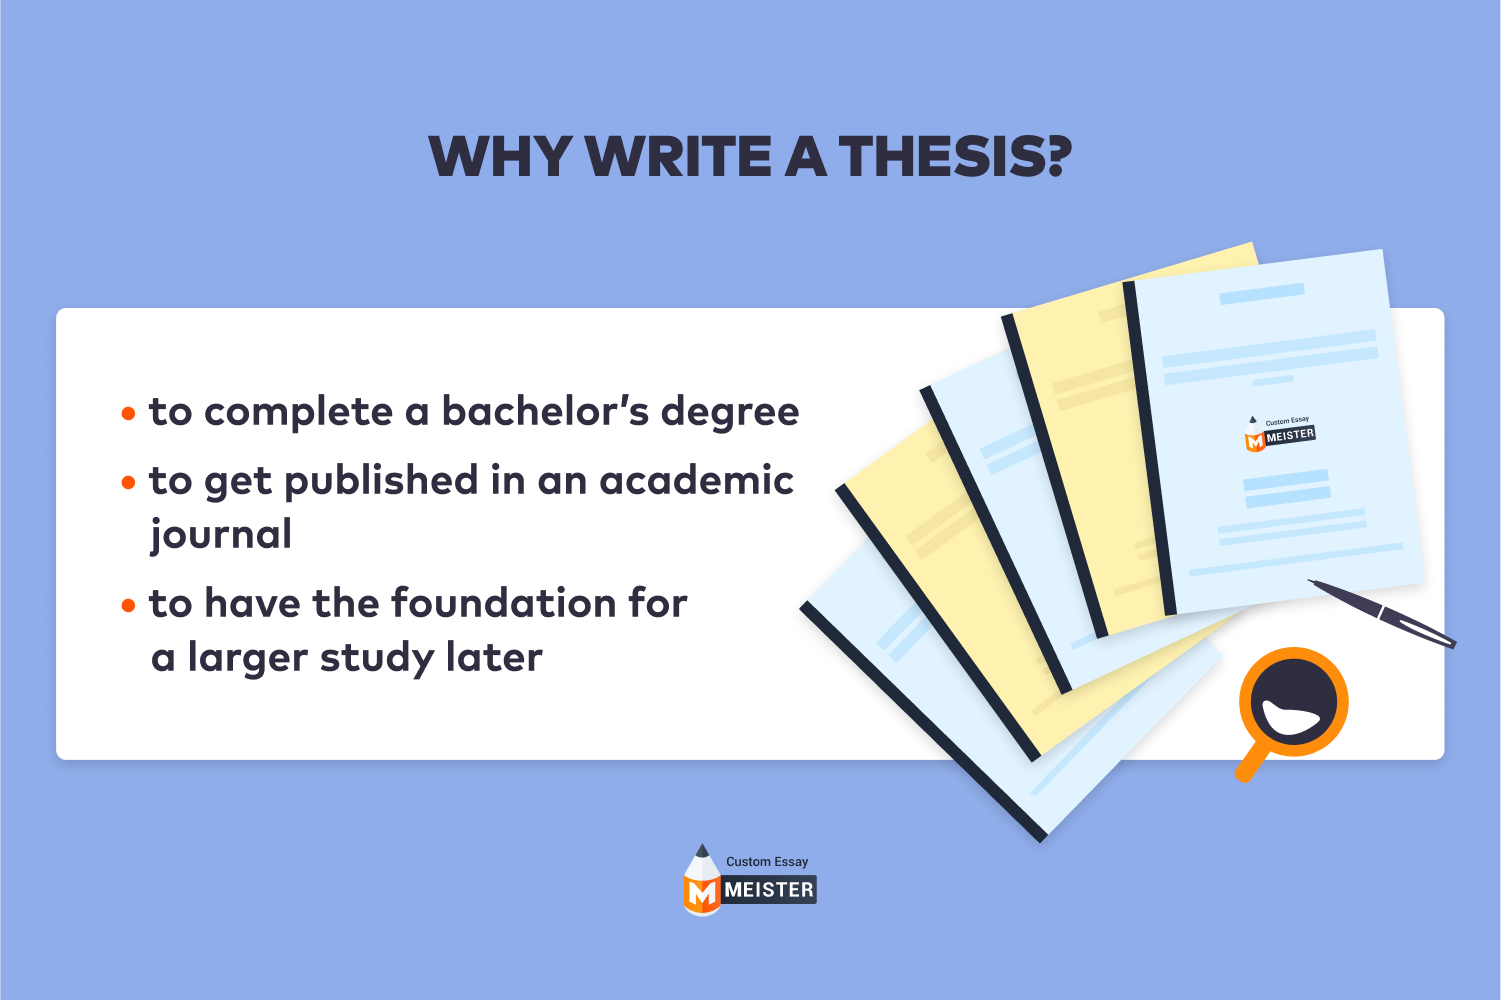 thesis writing services in peshawar